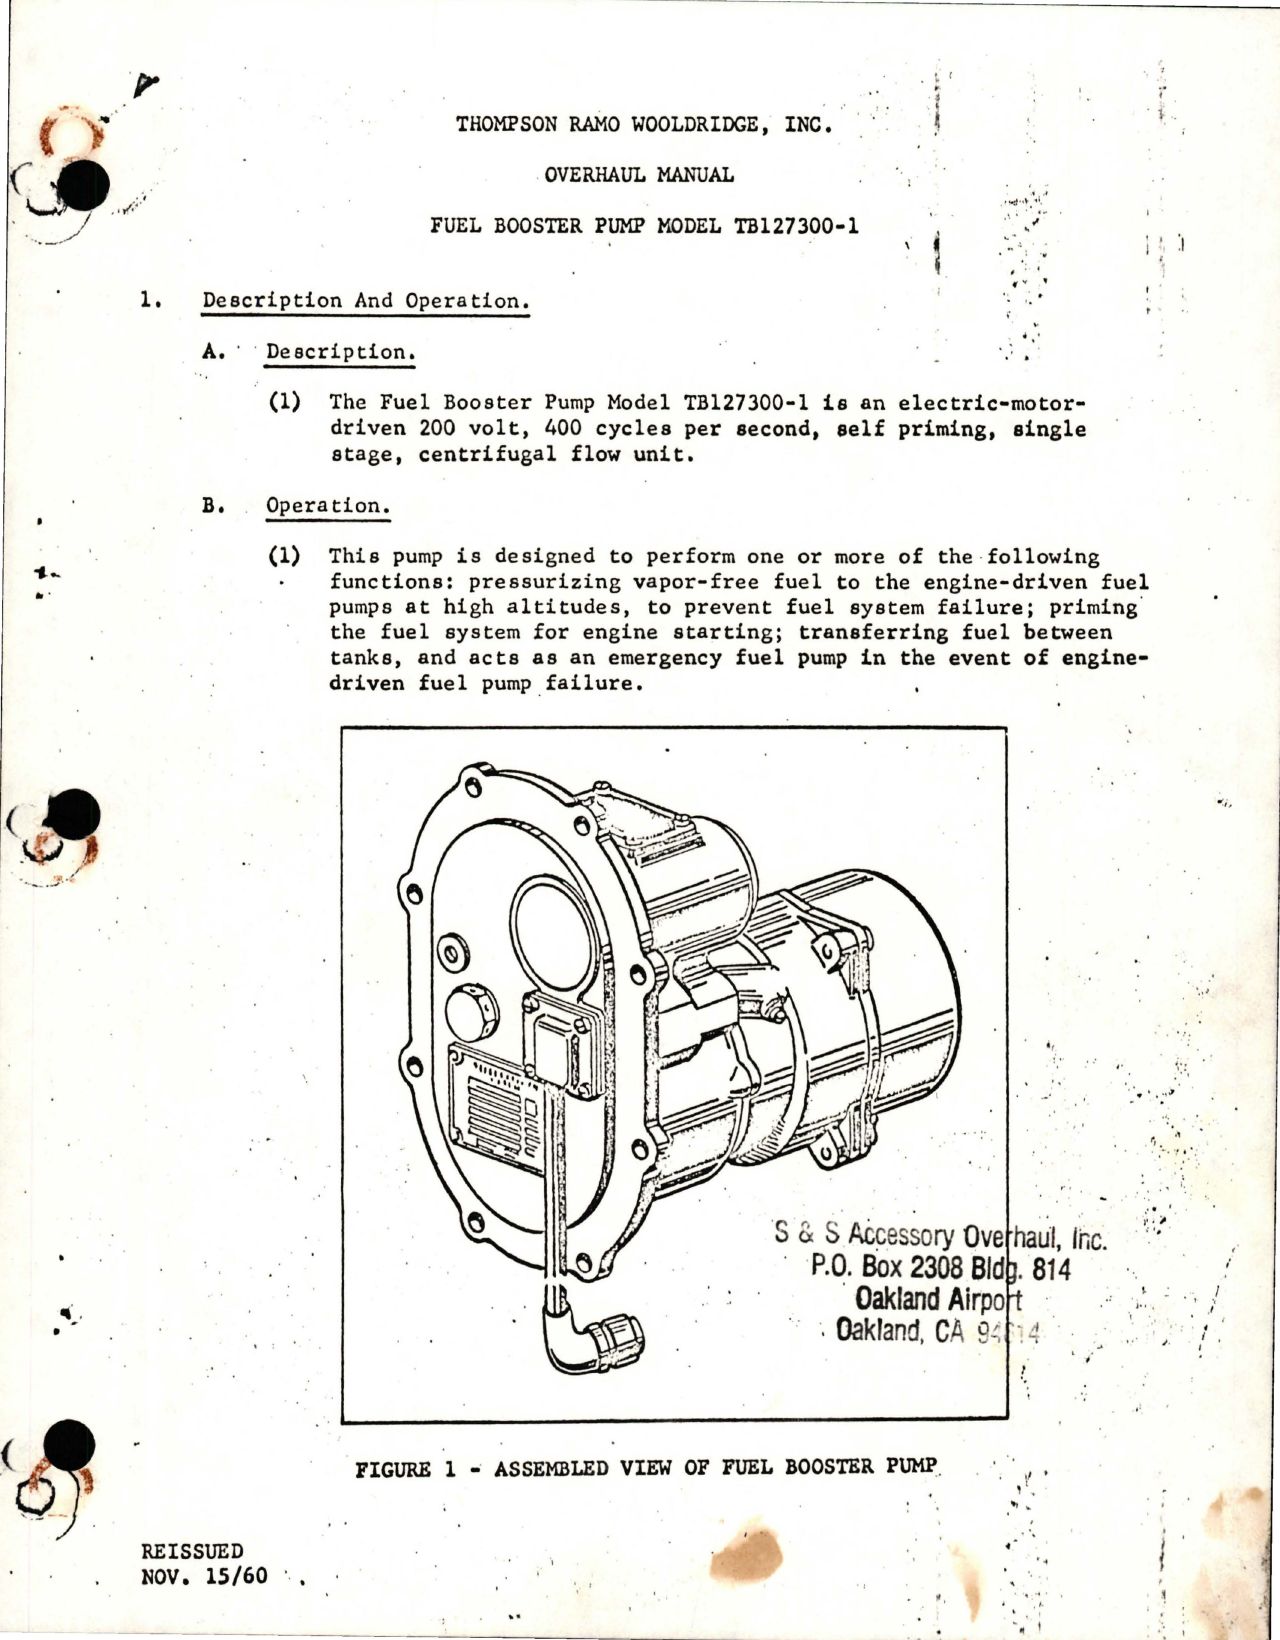 Sample page 1 from AirCorps Library document: Overhaul Manual for Fuel Booster Pump - Model TB127300-1